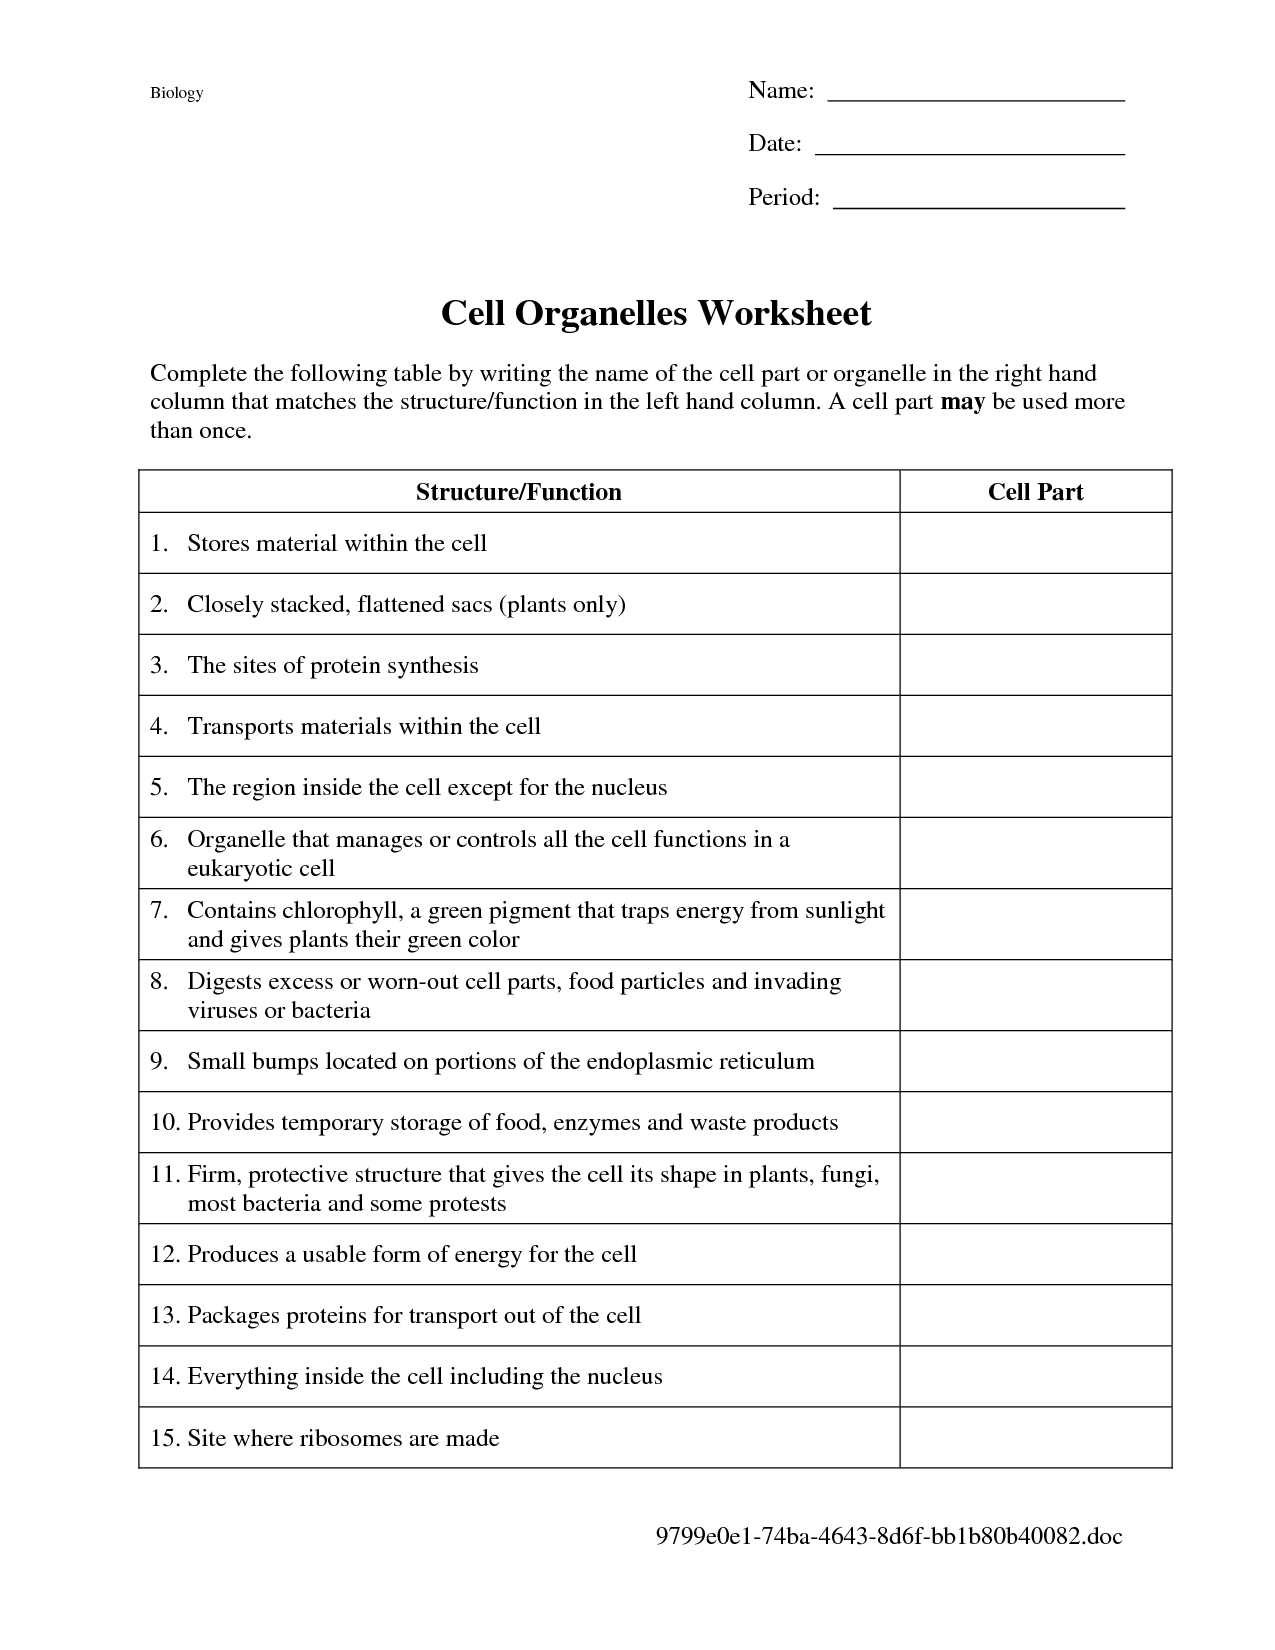 Cellular Respiration Breaking Down Energy Worksheet together with Cell Membrane Worksheet Google Search